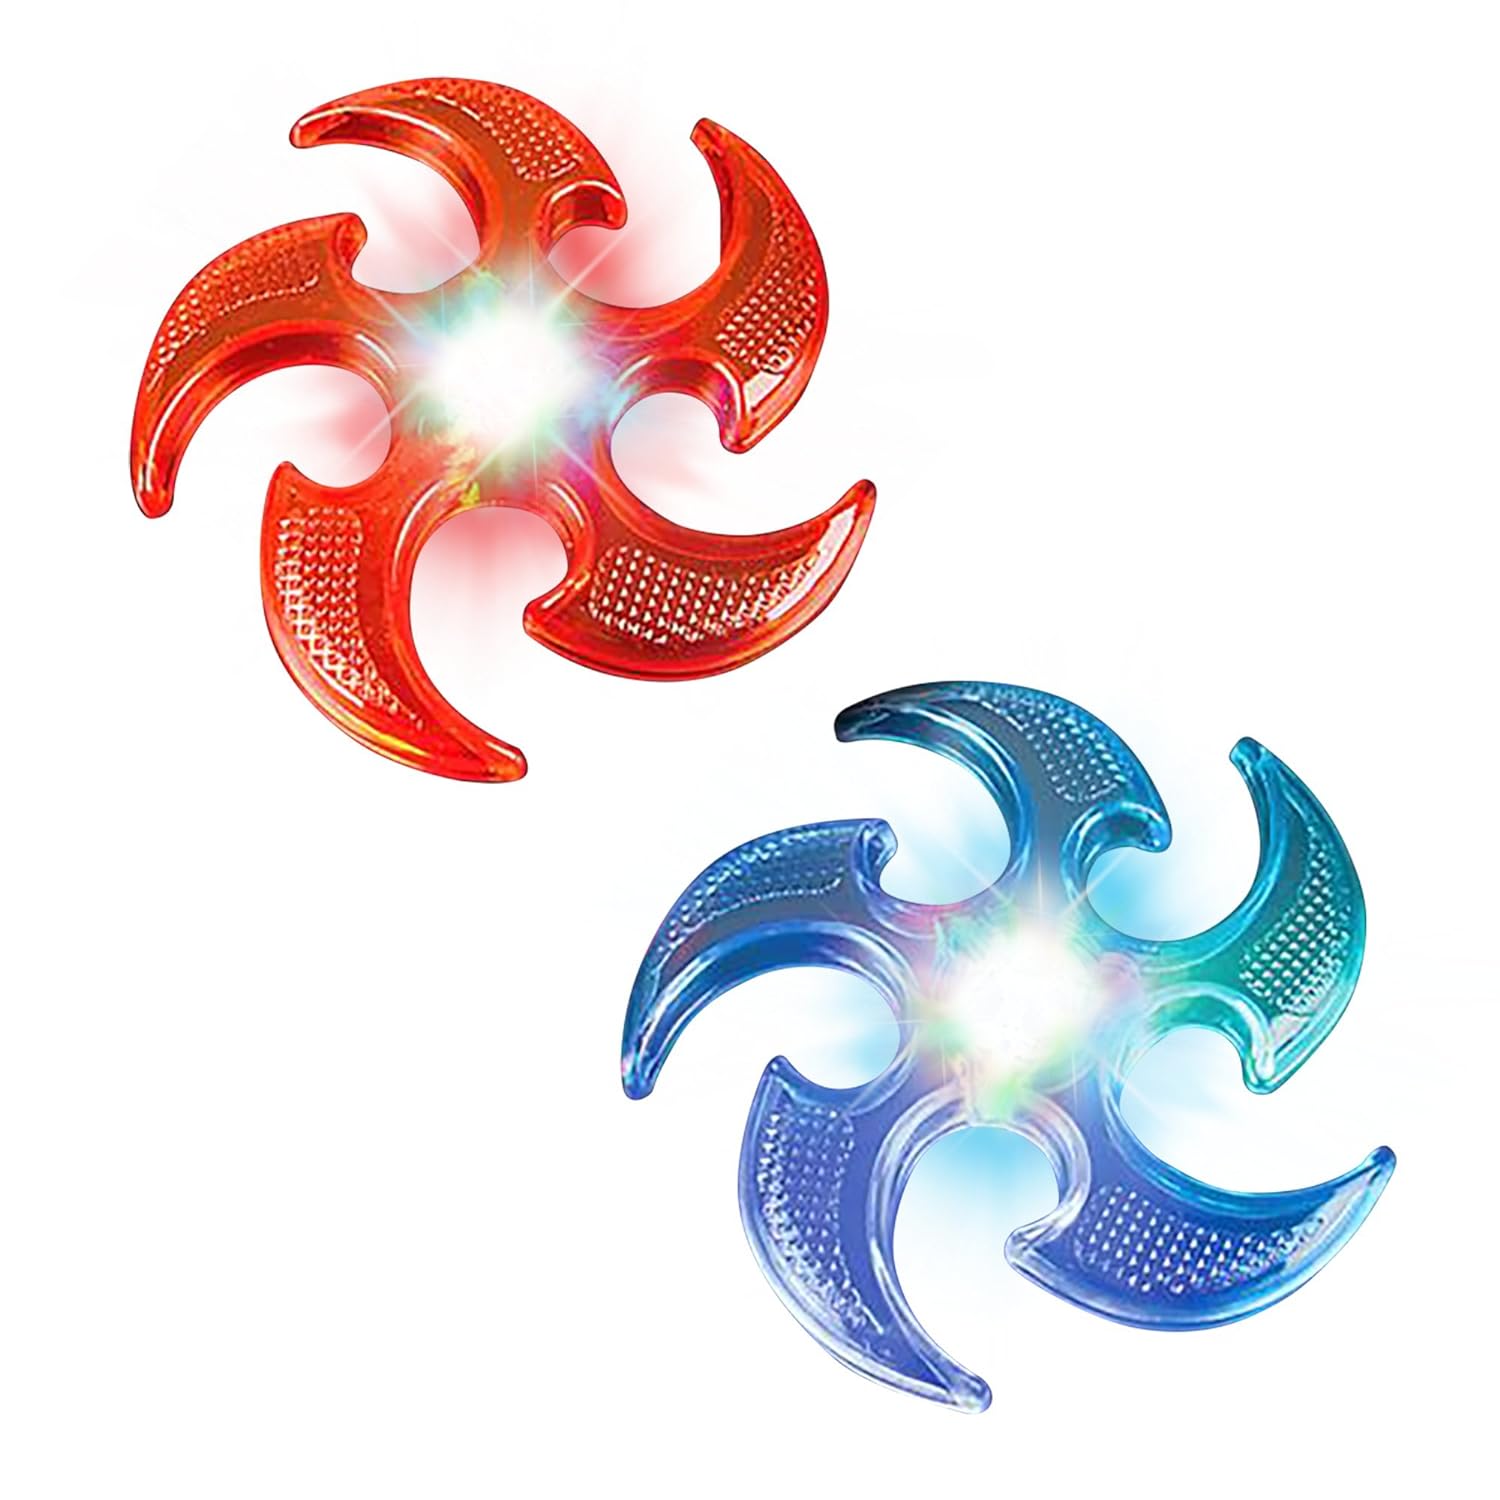 ArtCreativity Light Up Ninja Flyers Set - Pack of 2 - Ninja Star Flying Disc - Includes Batteries - One Red and One Blue - Fun Rubbery Summer Toy - Great Gift for Kids from Moms